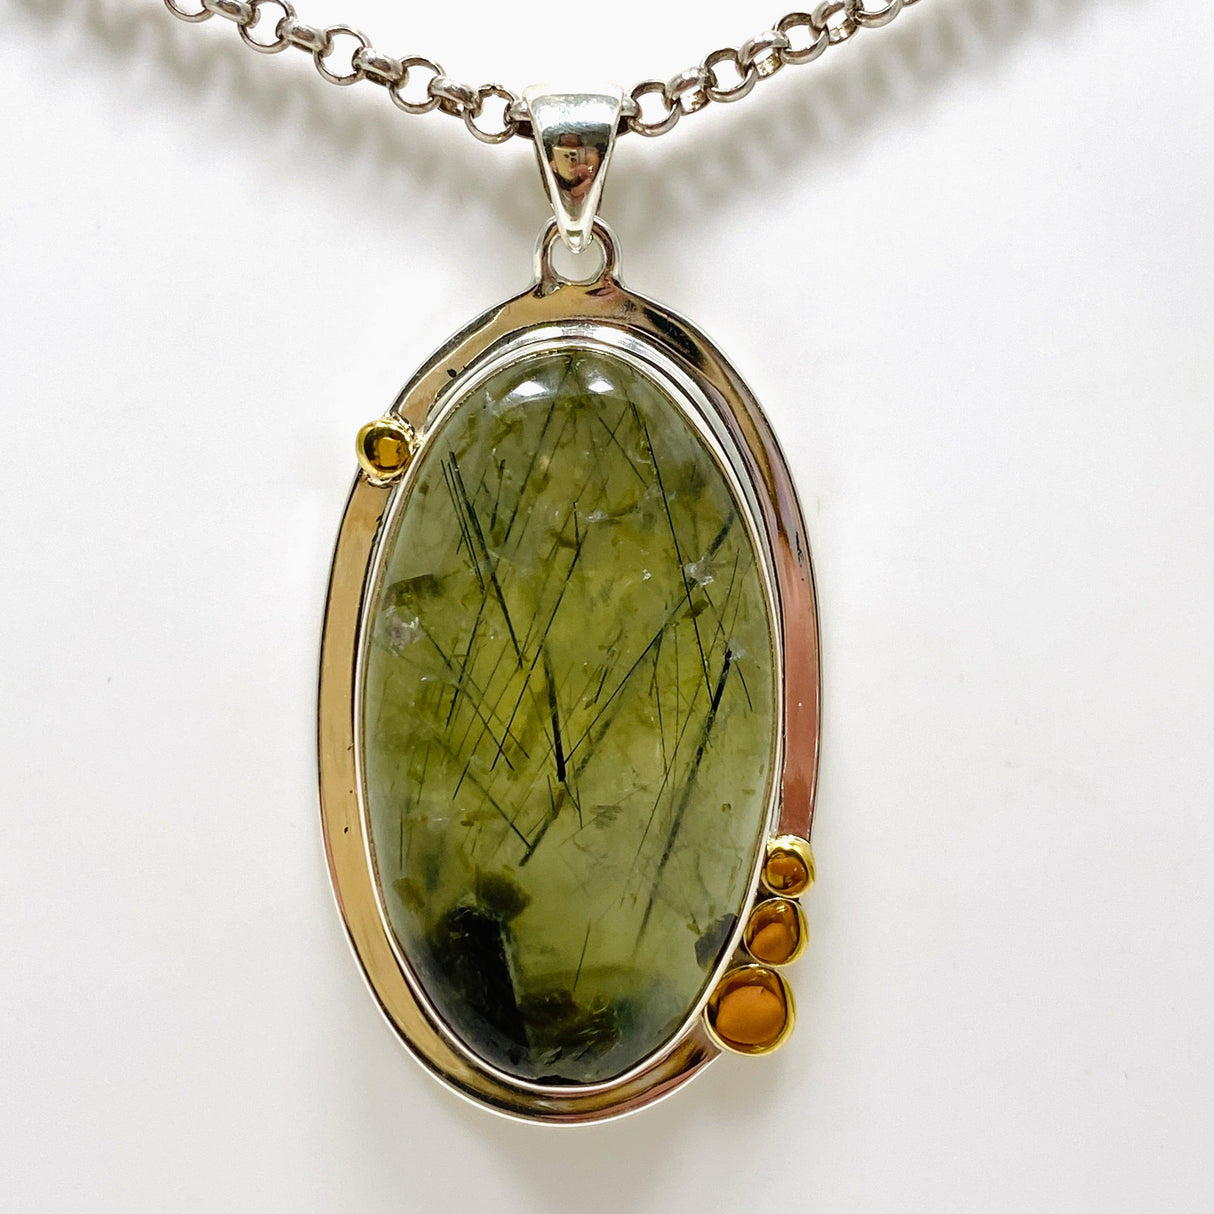 Prehnite and Epidote Oval Pendant with Brass Accents KPGJ4290 - Nature's Magick